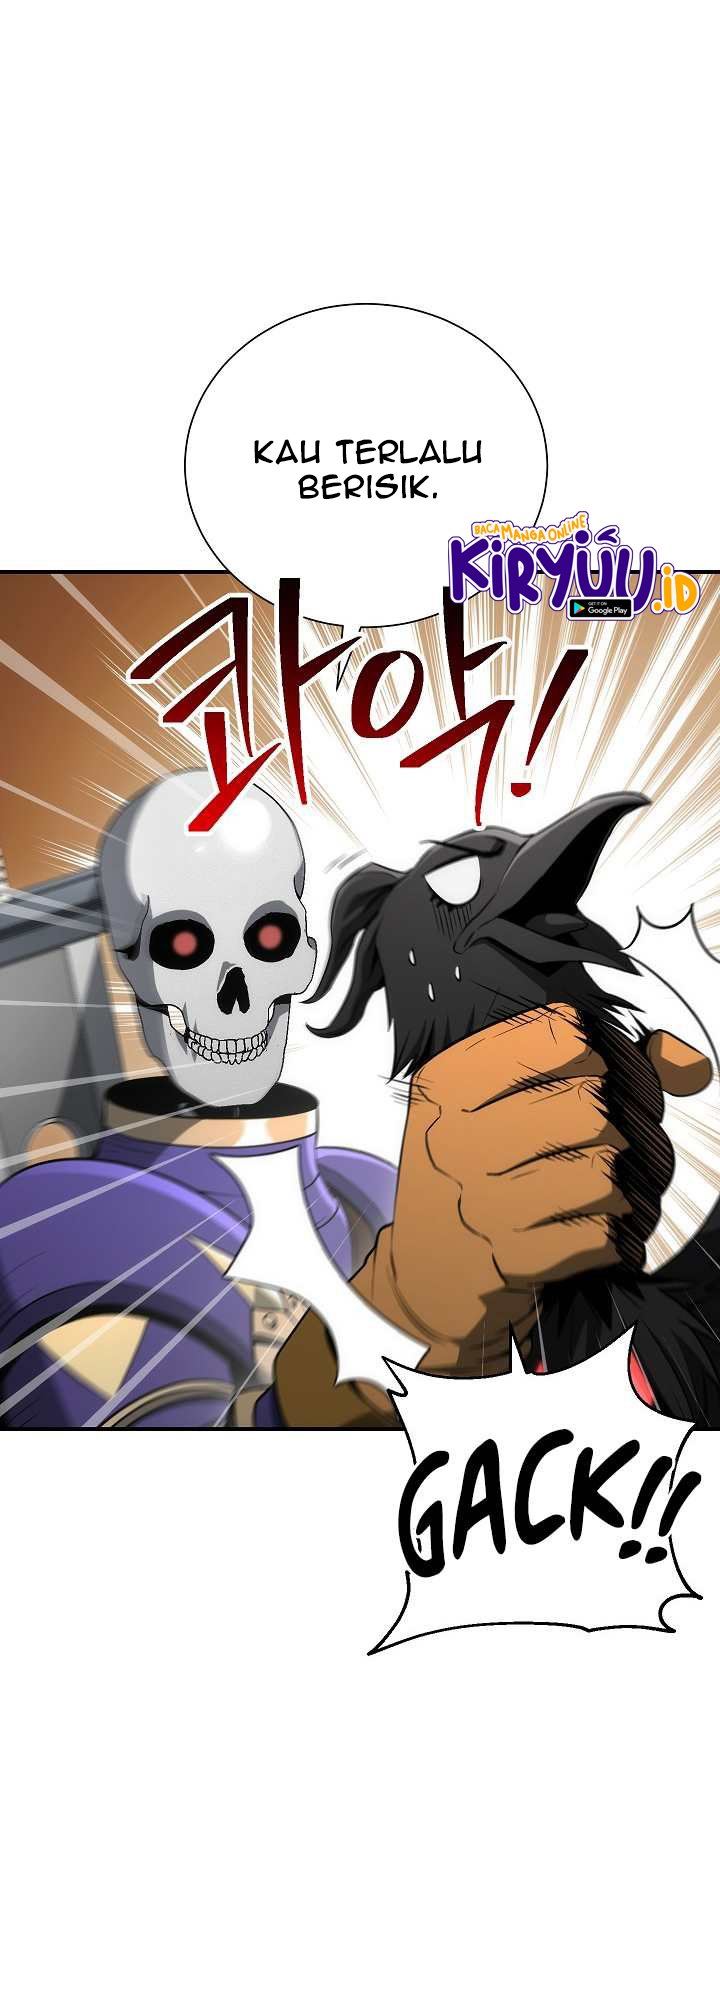 Skeleton Soldier Couldn’t Protect the Dungeon Chapter 155